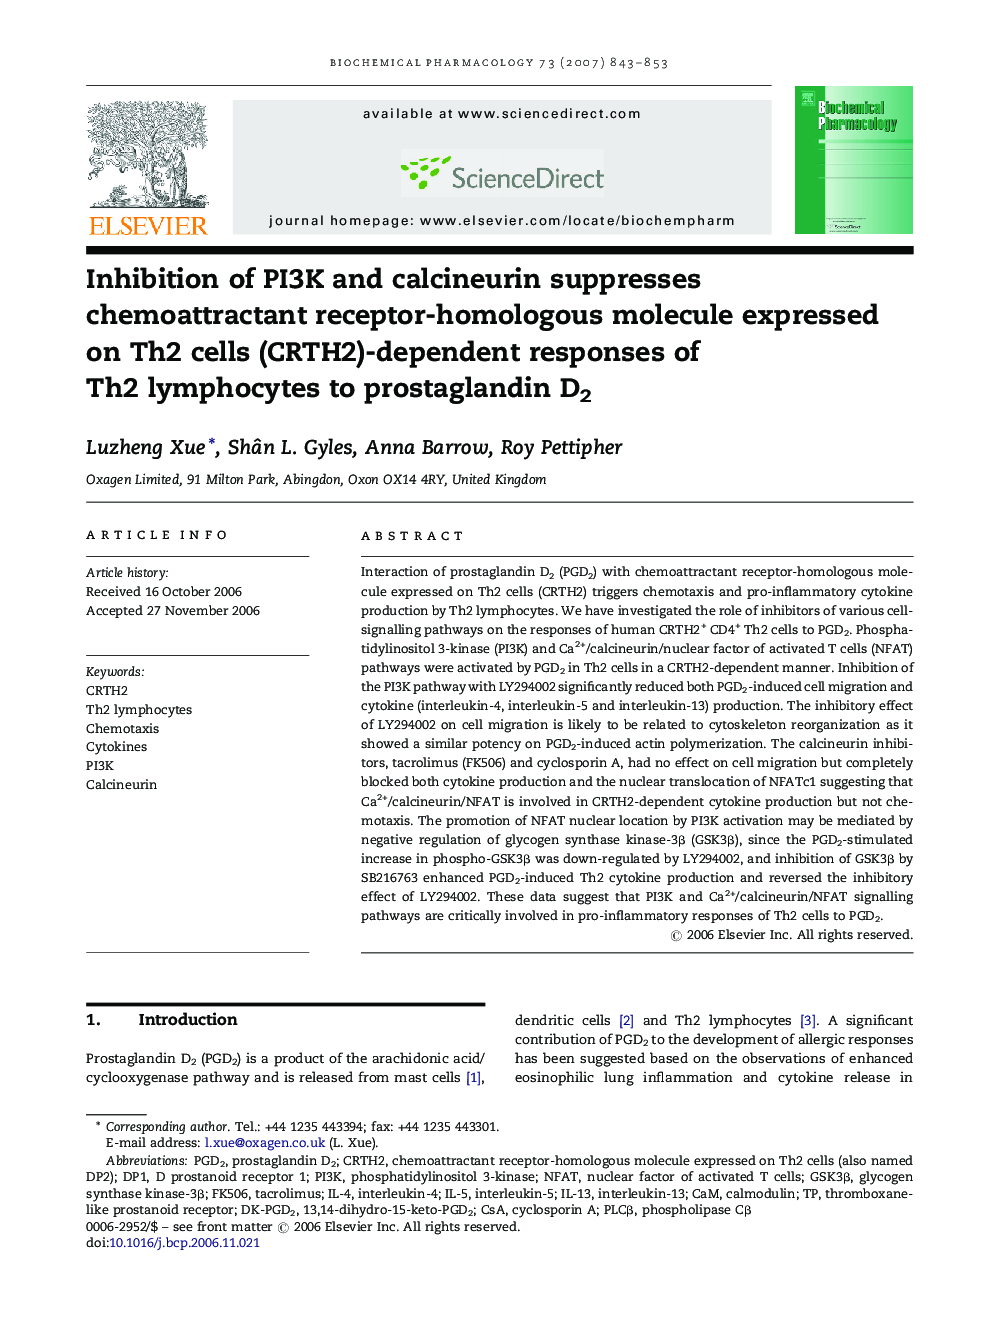 Inhibition of PI3K and calcineurin suppresses chemoattractant receptor-homologous molecule expressed on Th2 cells (CRTH2)-dependent responses of Th2 lymphocytes to prostaglandin D2